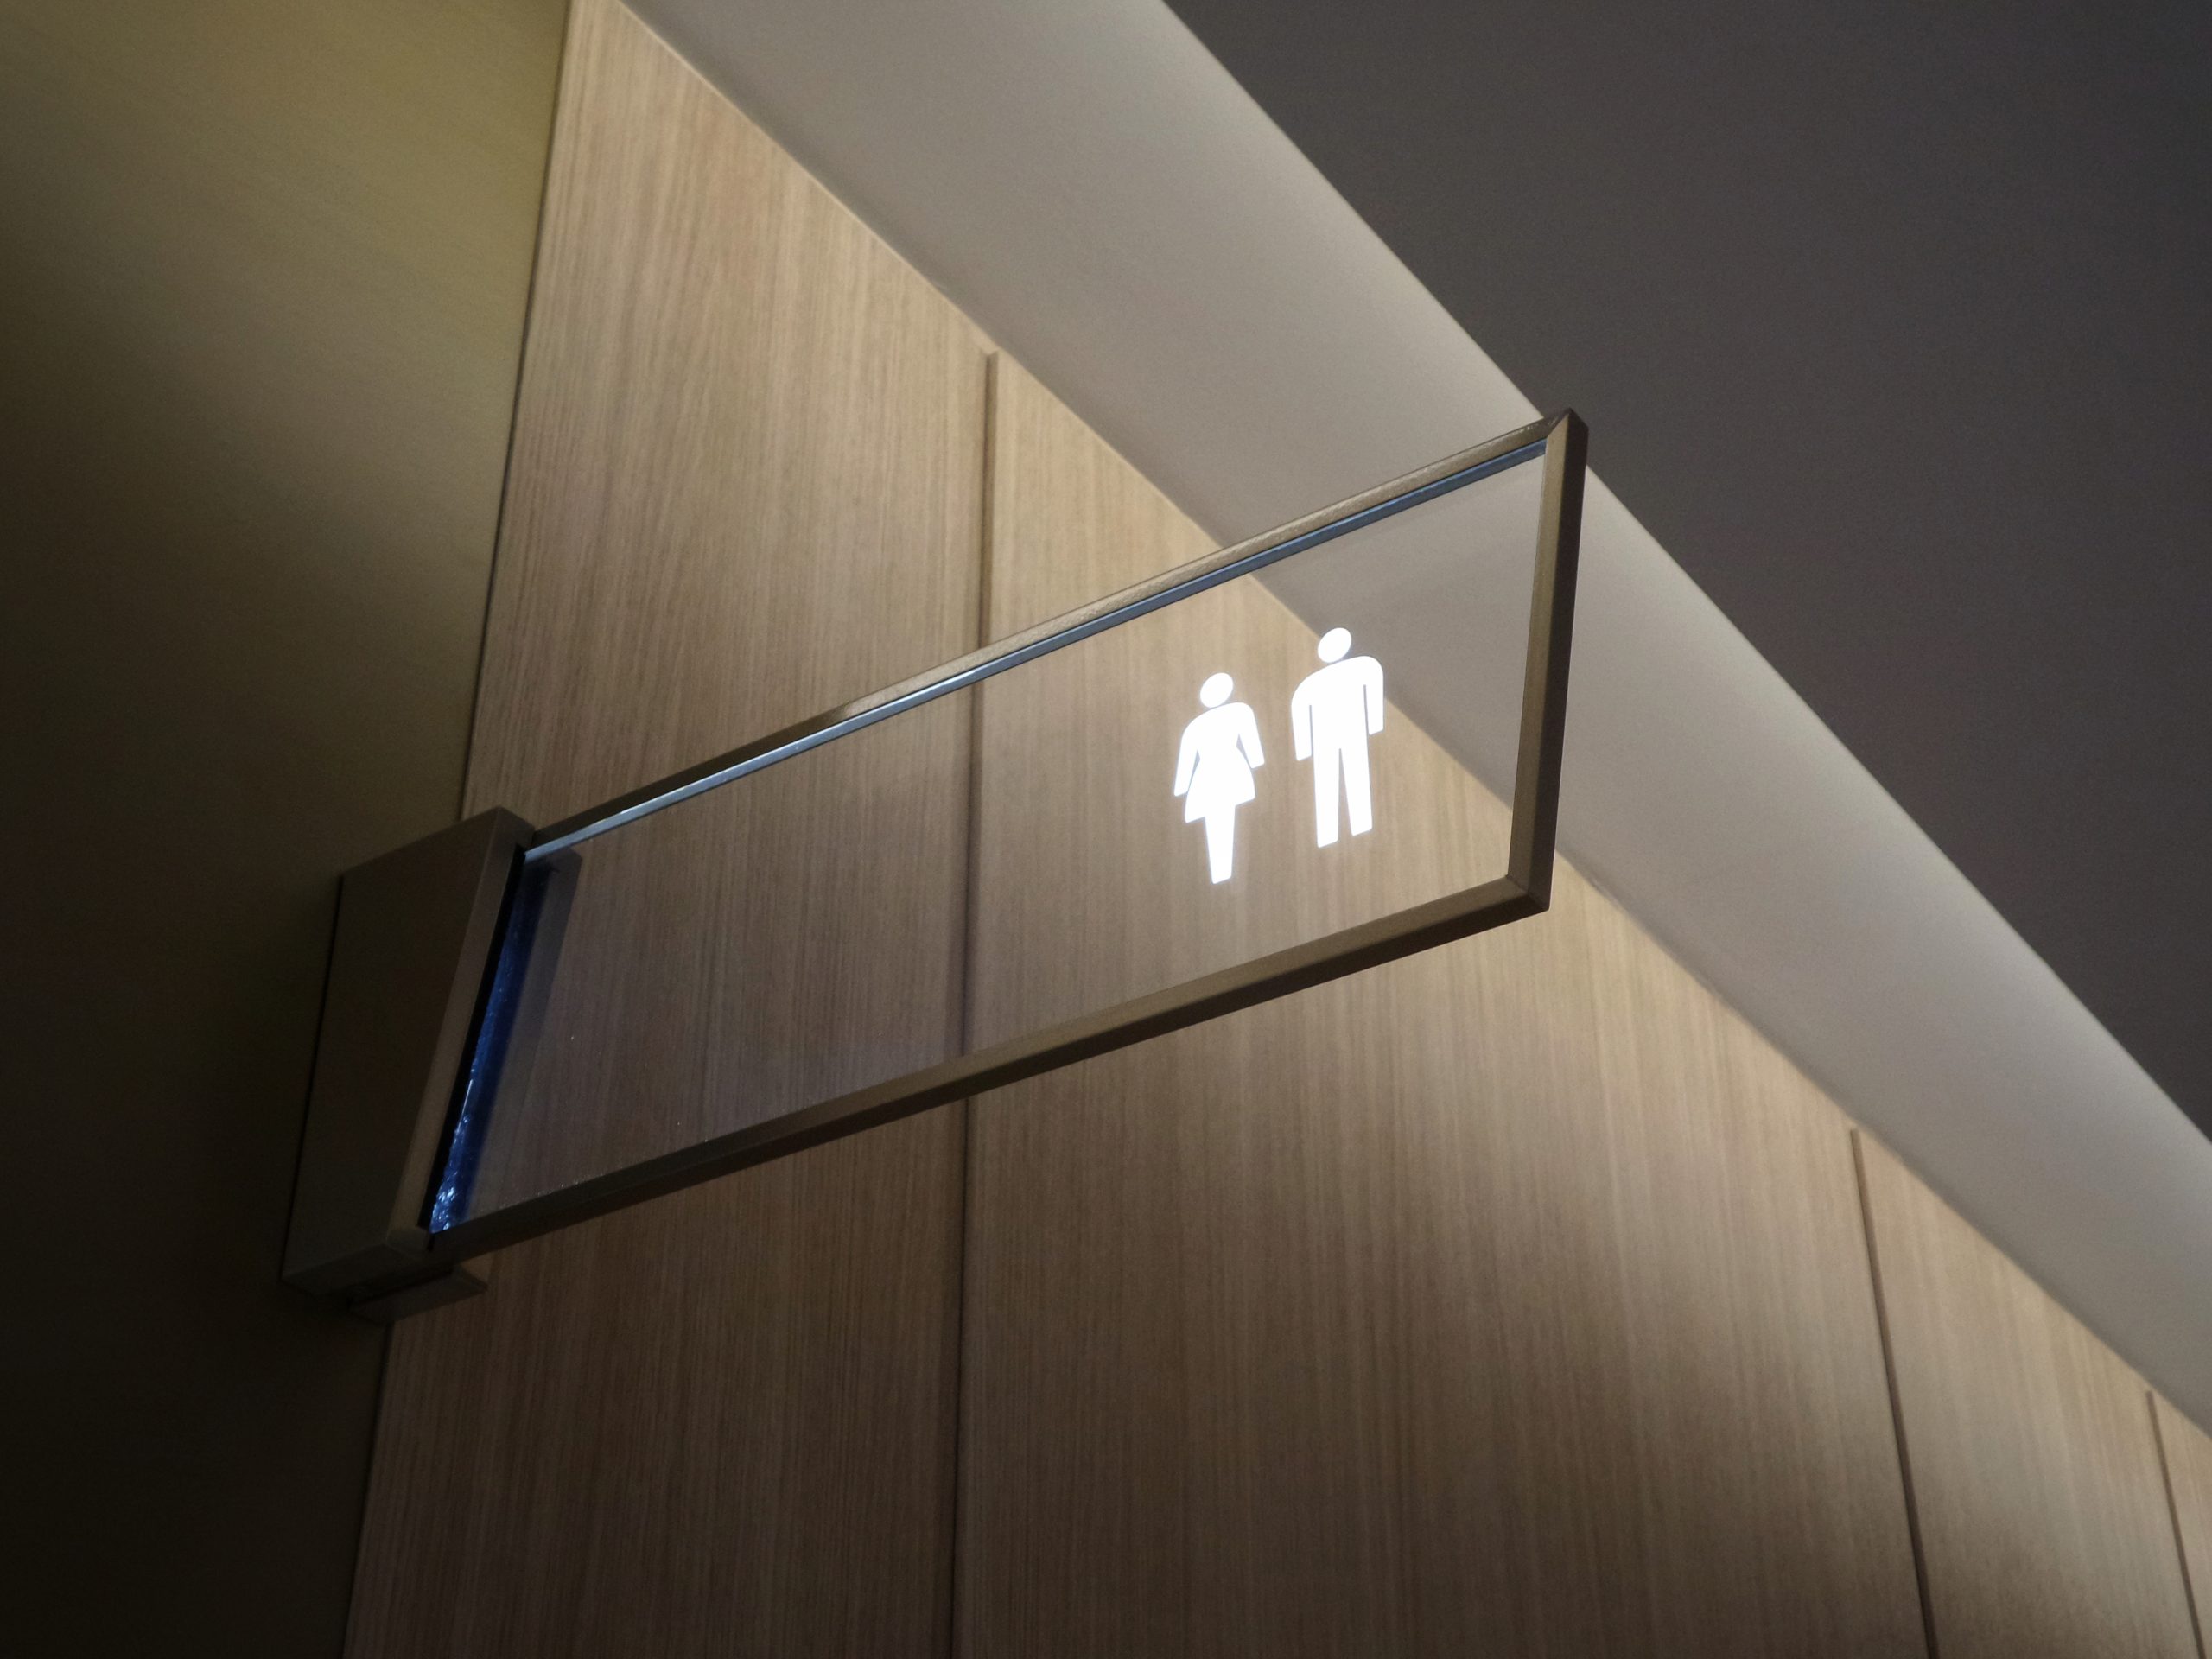 4 Reasons Why Your Commercial Bathroom Needs Toilet Partitions